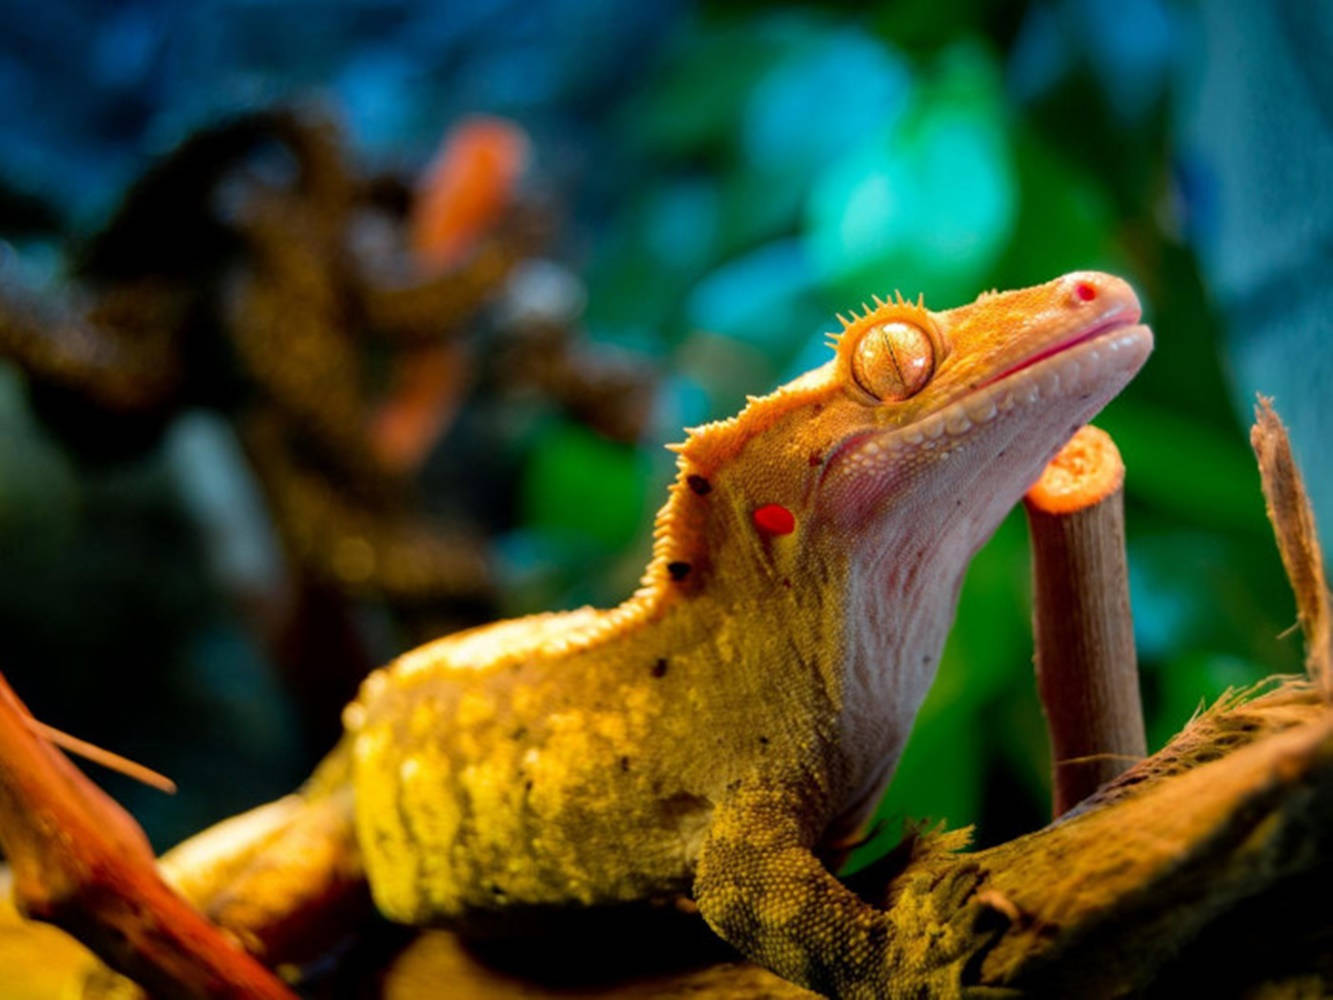 Crested Gecko On Plant